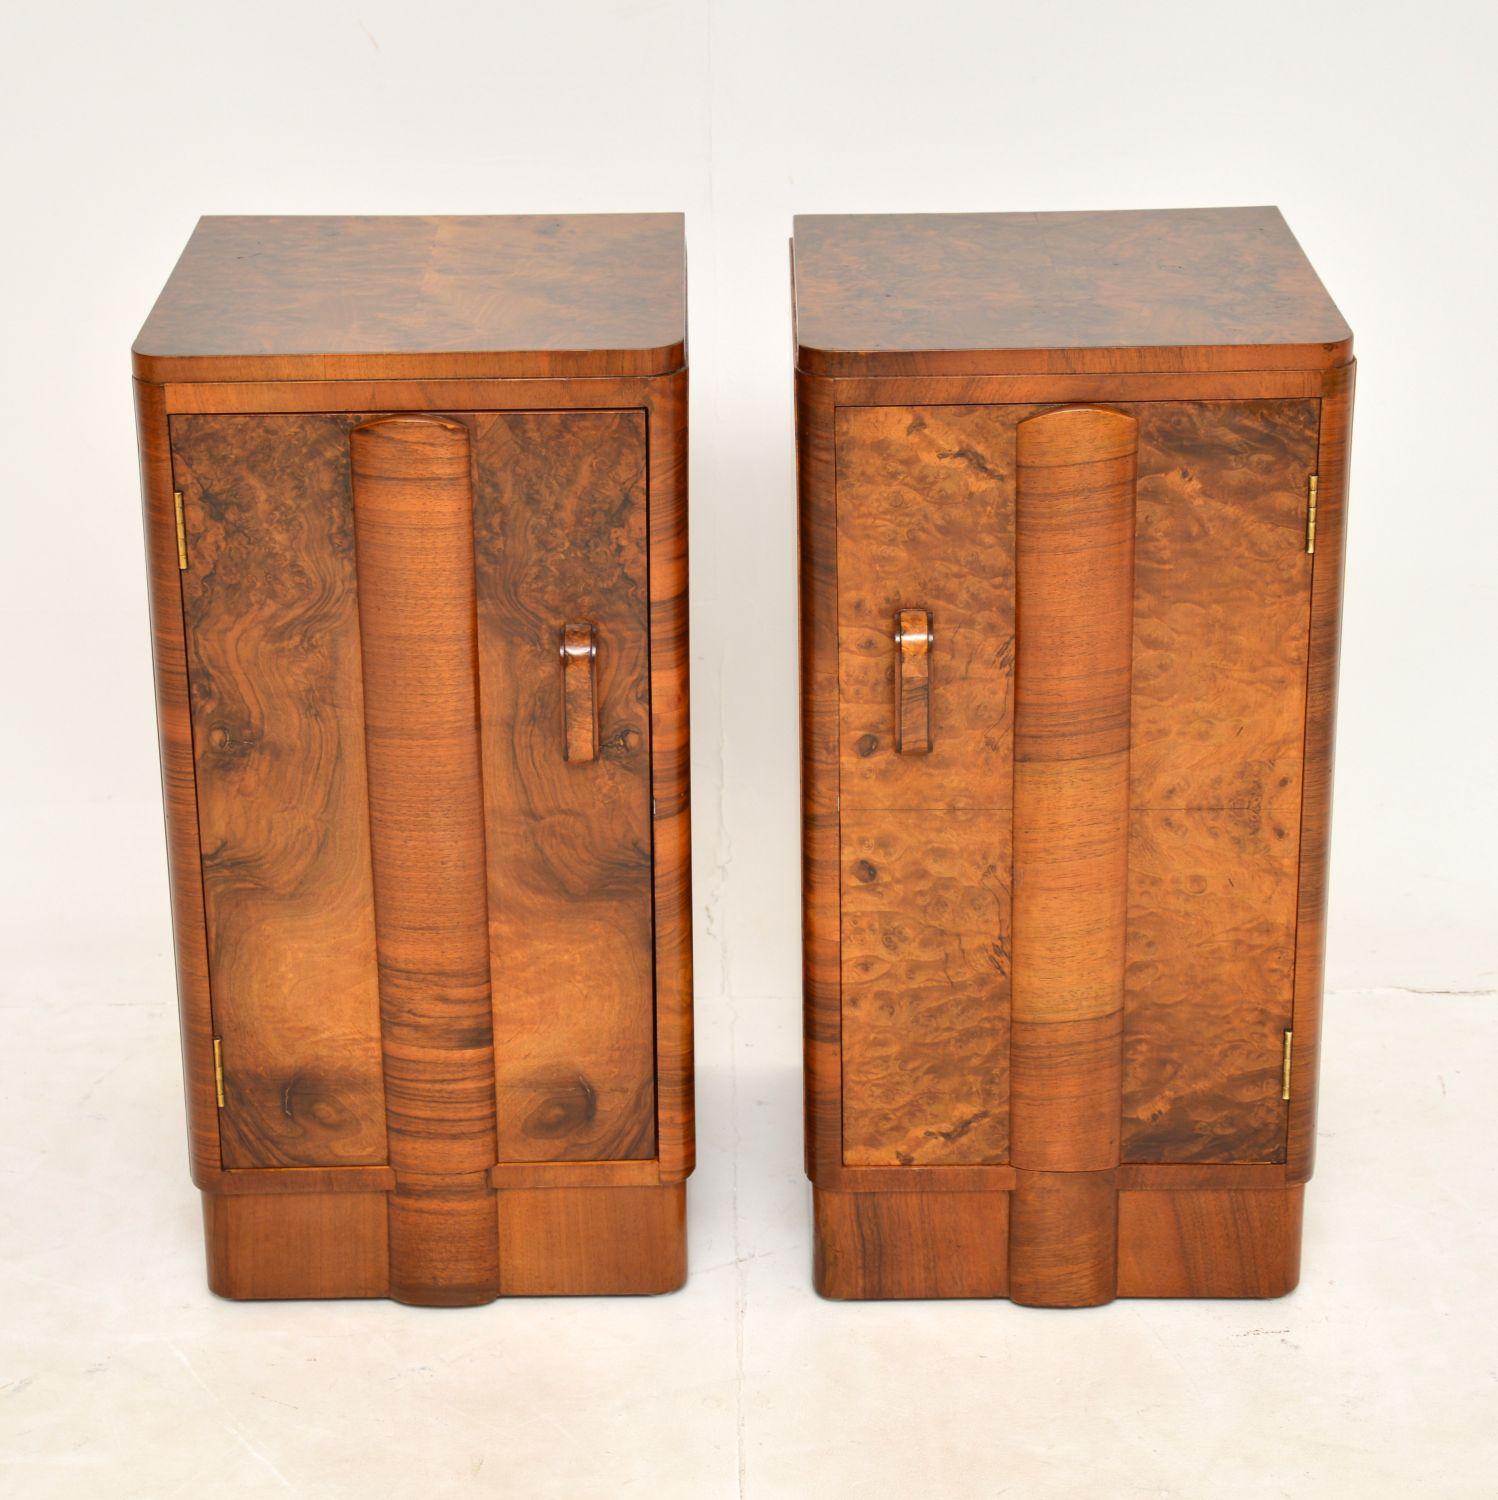 A beautiful pair of original Art Deco period bedside cabinets in Walnut. These were made in England, they date from the 1930’s.

They are of amazing quality, have a beautiful design and are a very useful size. The door fronts have a lovely moulded